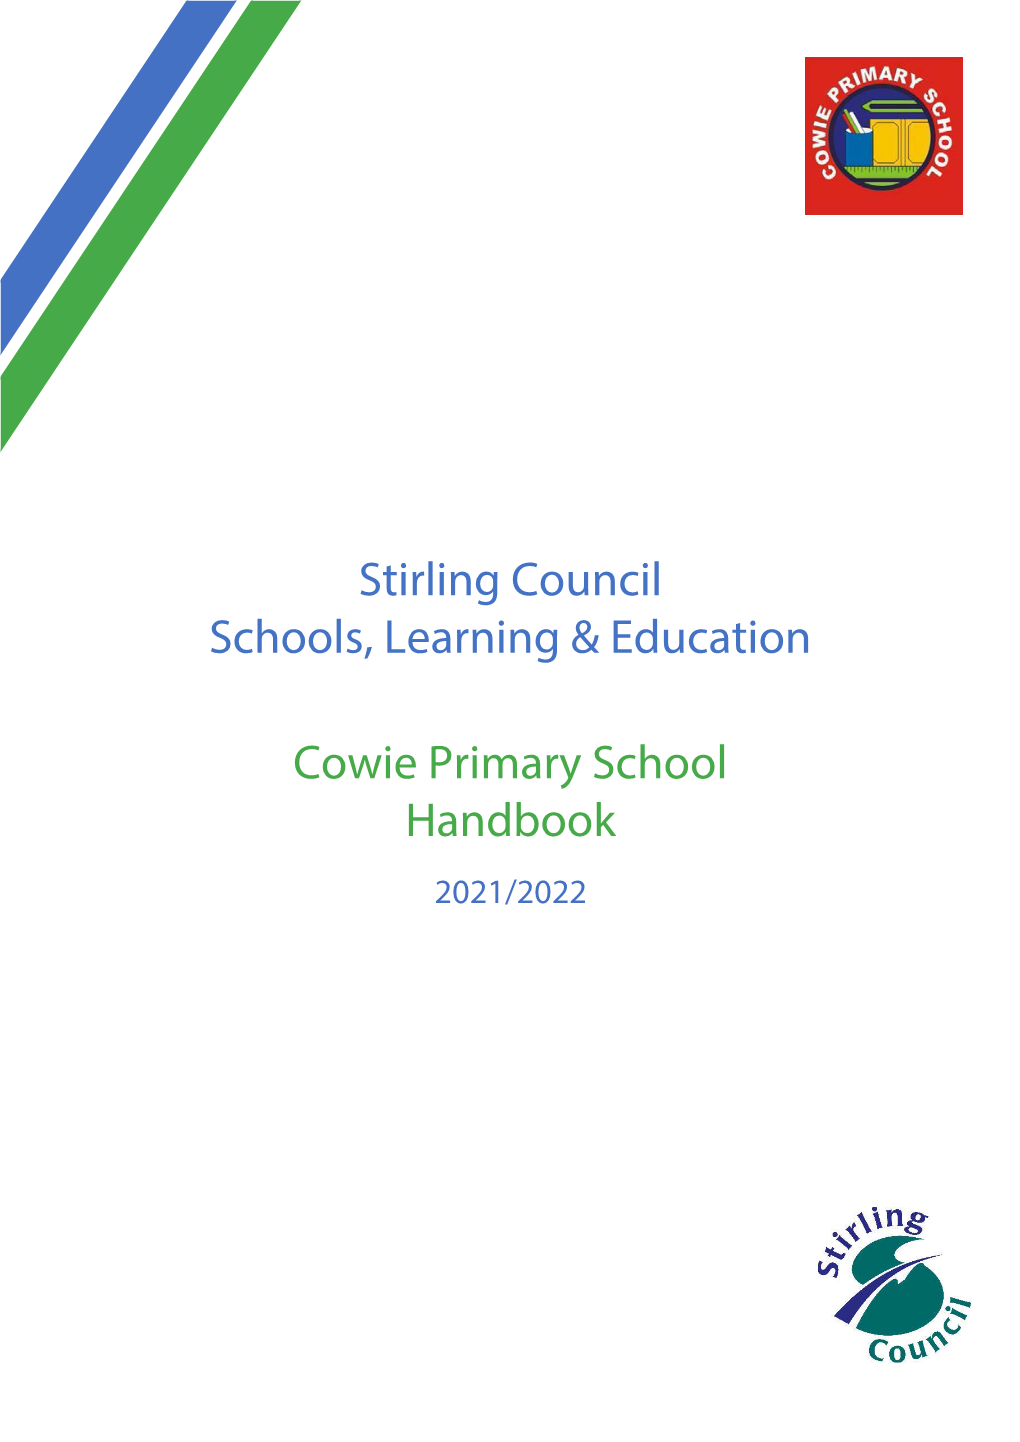 Stirling Council Schools, Learning & Education Cowie Primary School